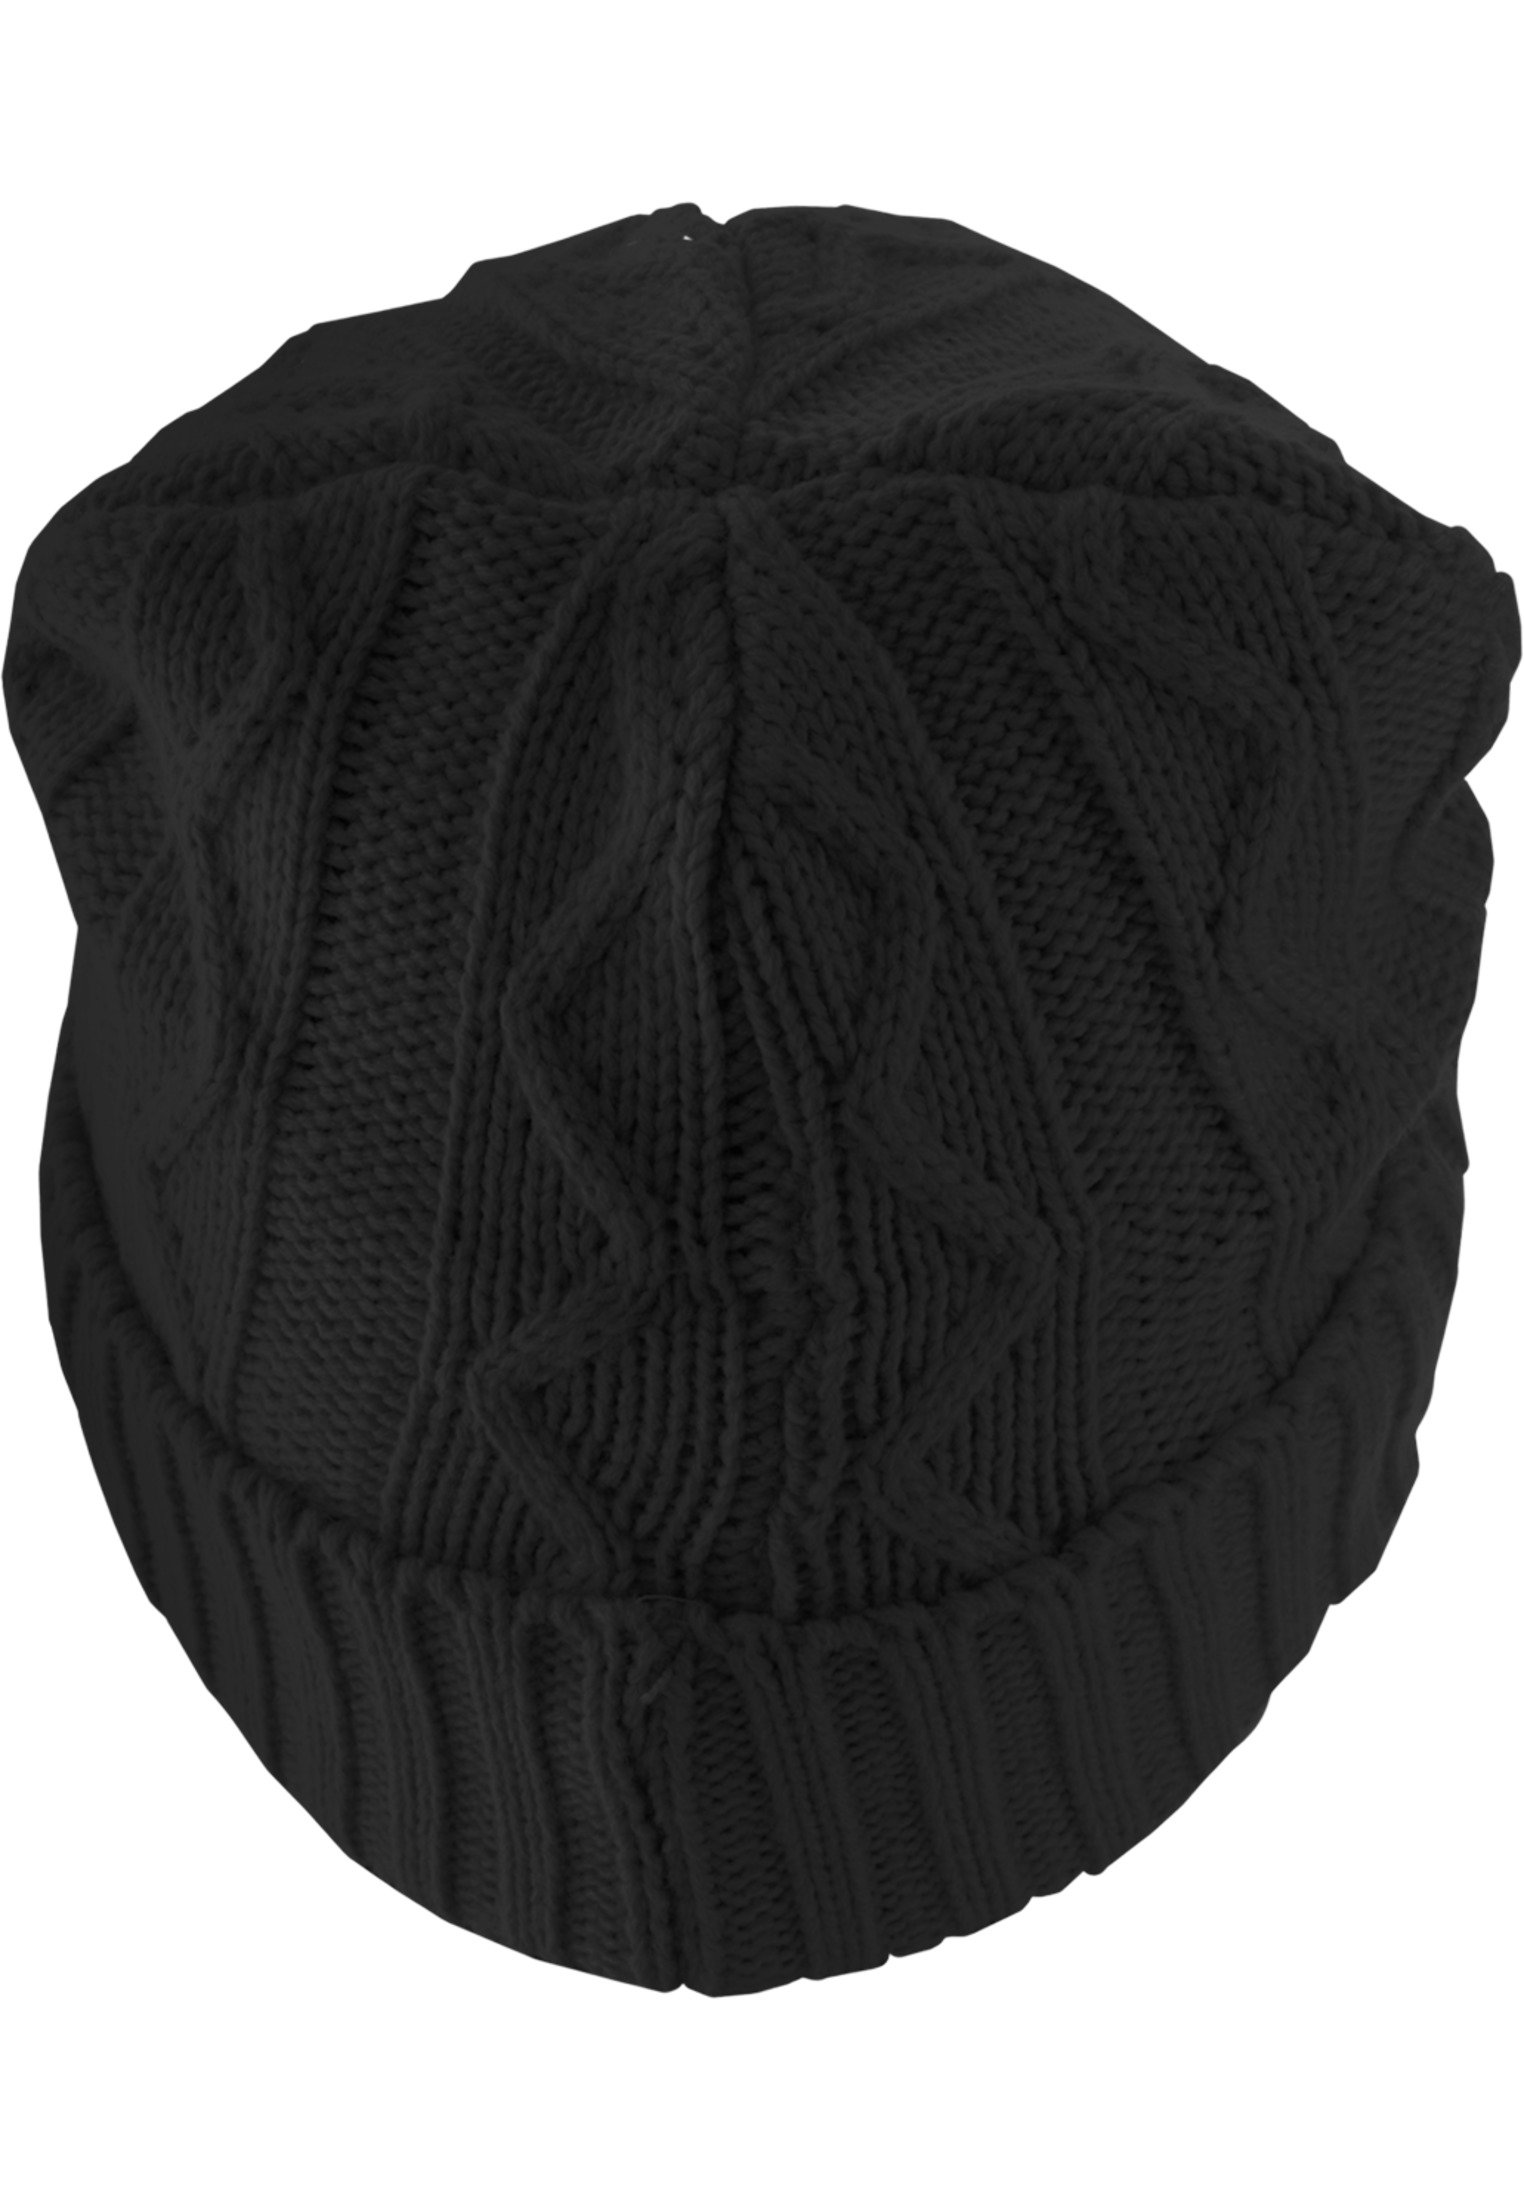 Beanie Cable Flap black one size